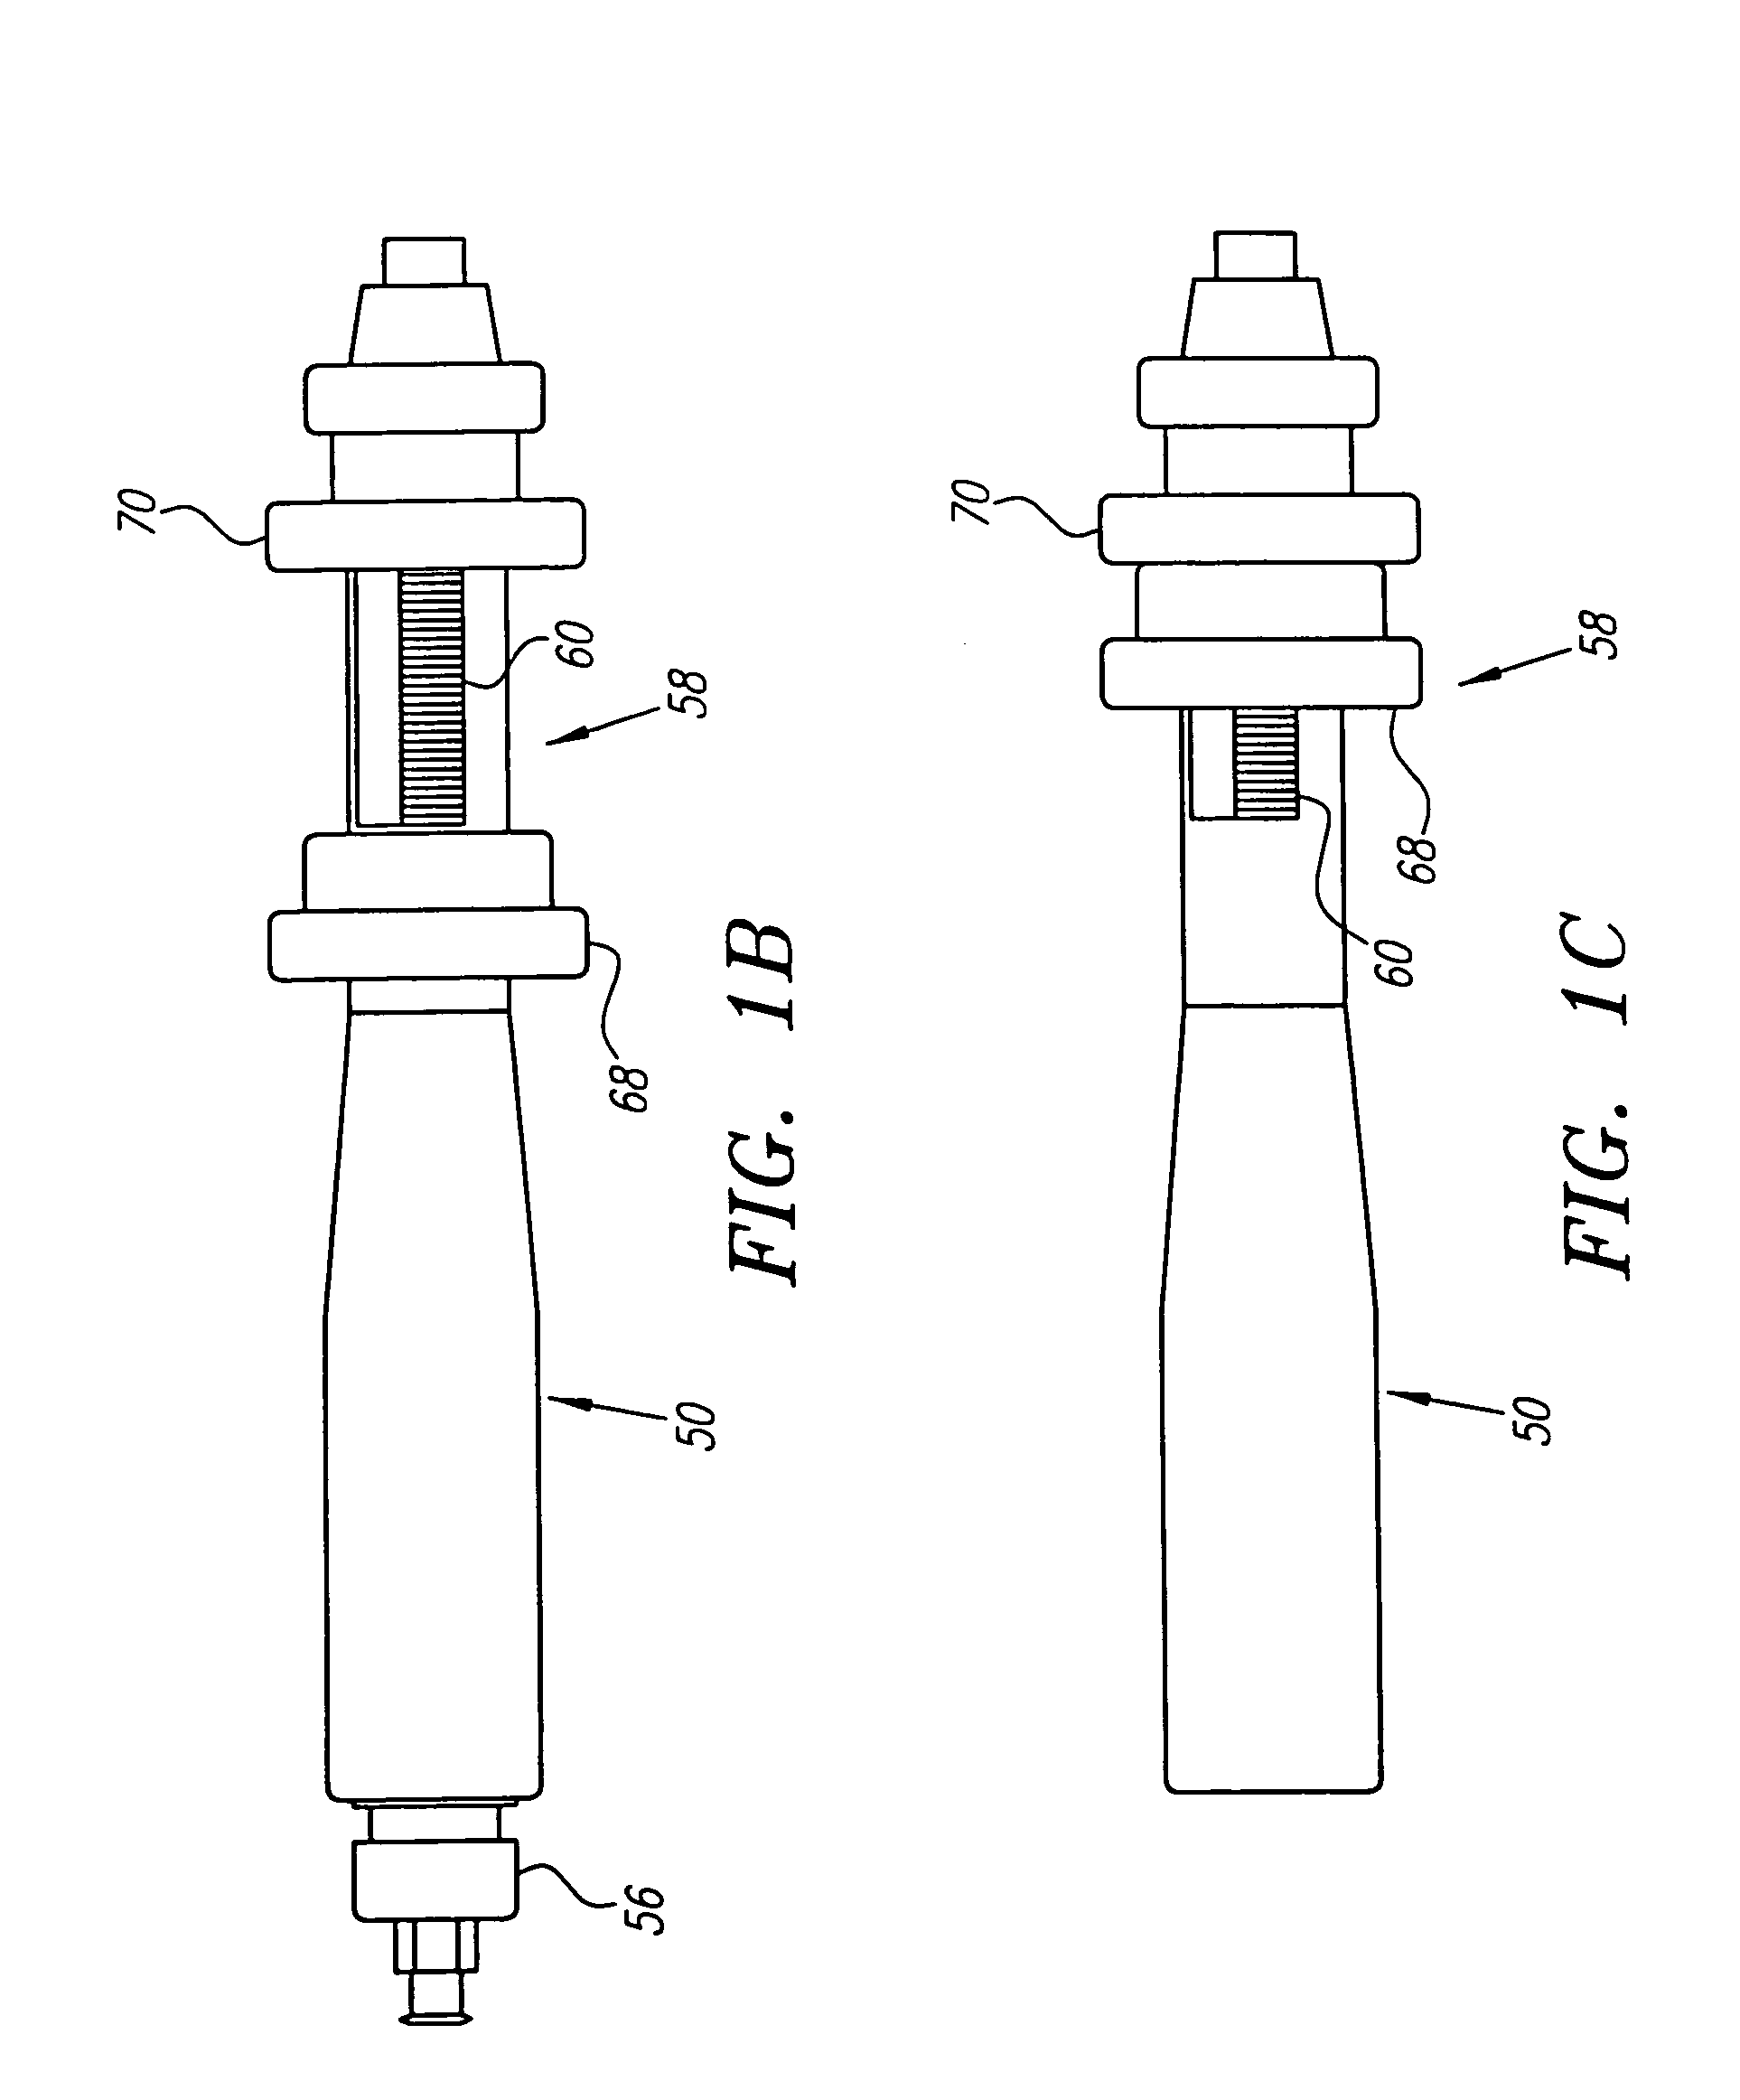 Systems and methods for delivering drugs to selected locations within the body